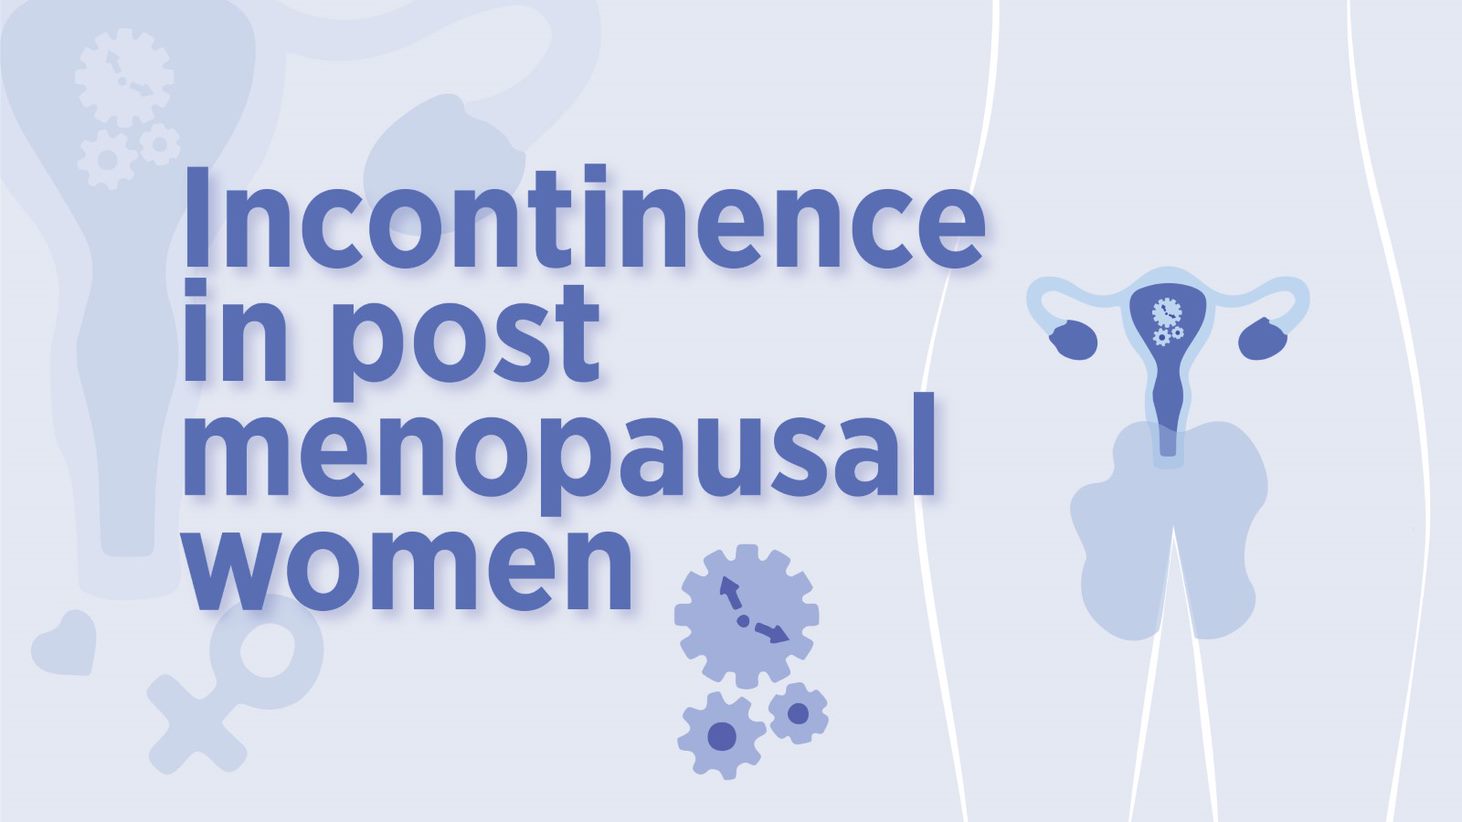 Genitourinary syndrome in post-menopause [27]